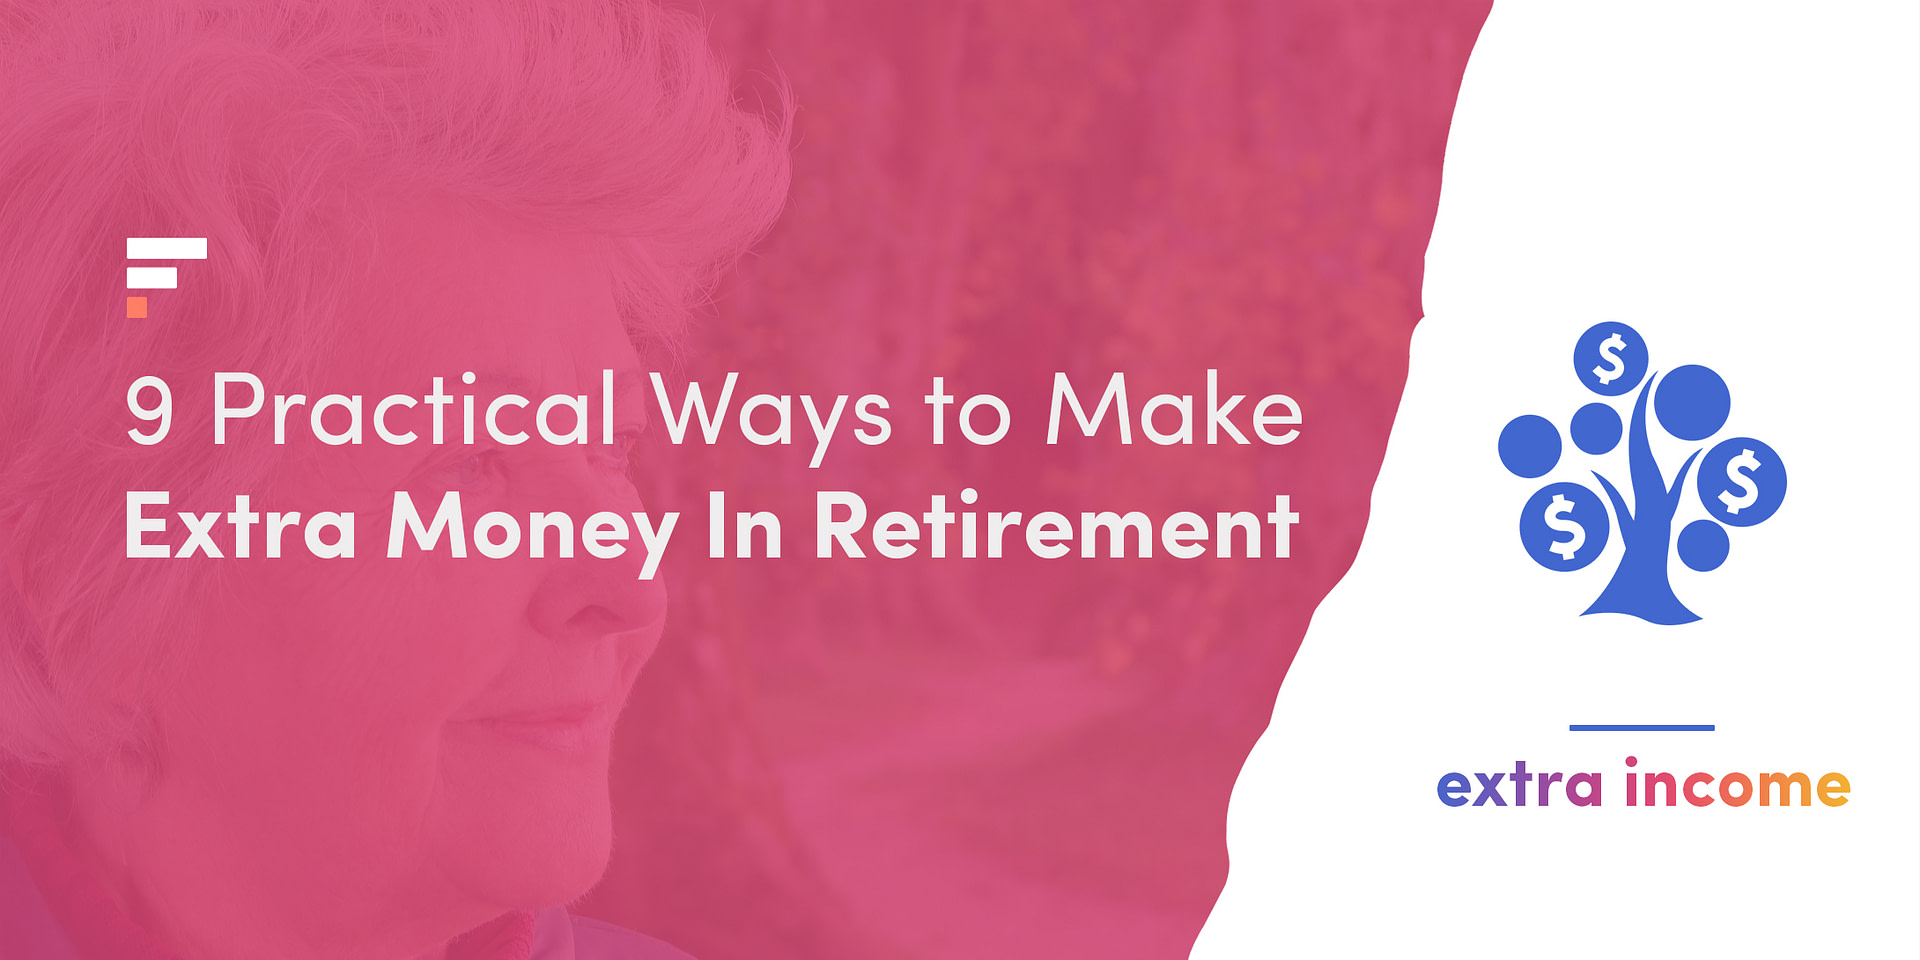 9 Practical Ways to Make Extra Money In Retirement